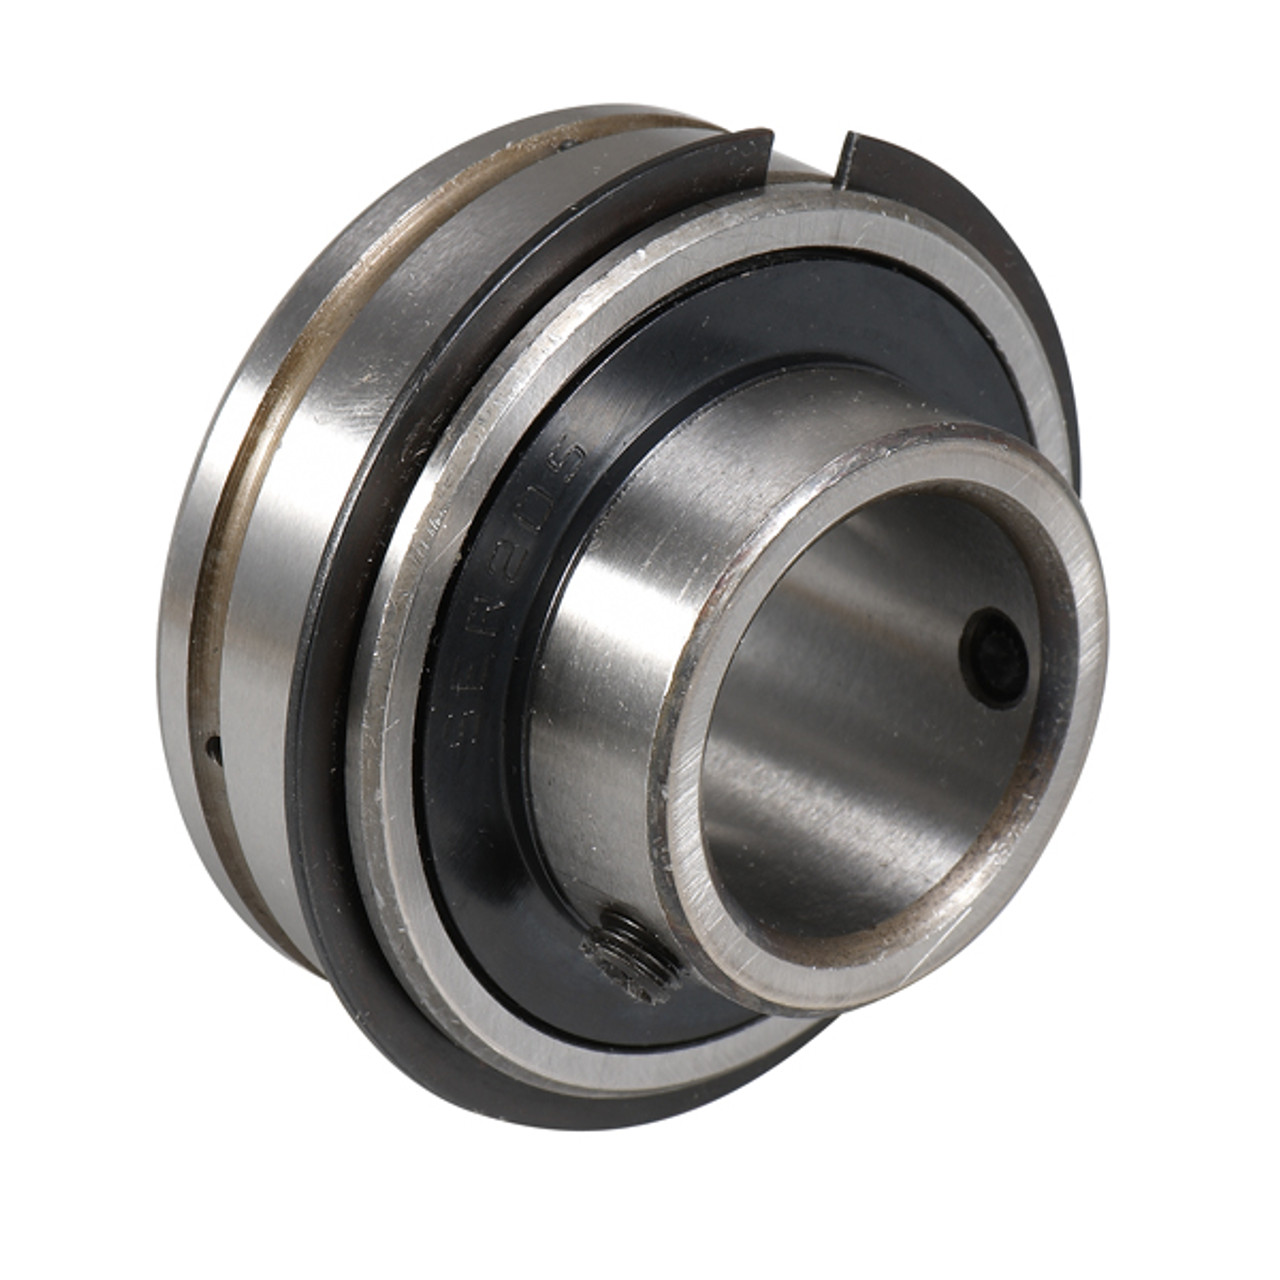 SER206 GENERIC 30mm Normal duty bearing insert with a parallel outer race and grubscrew locking - Metric Thumbnail